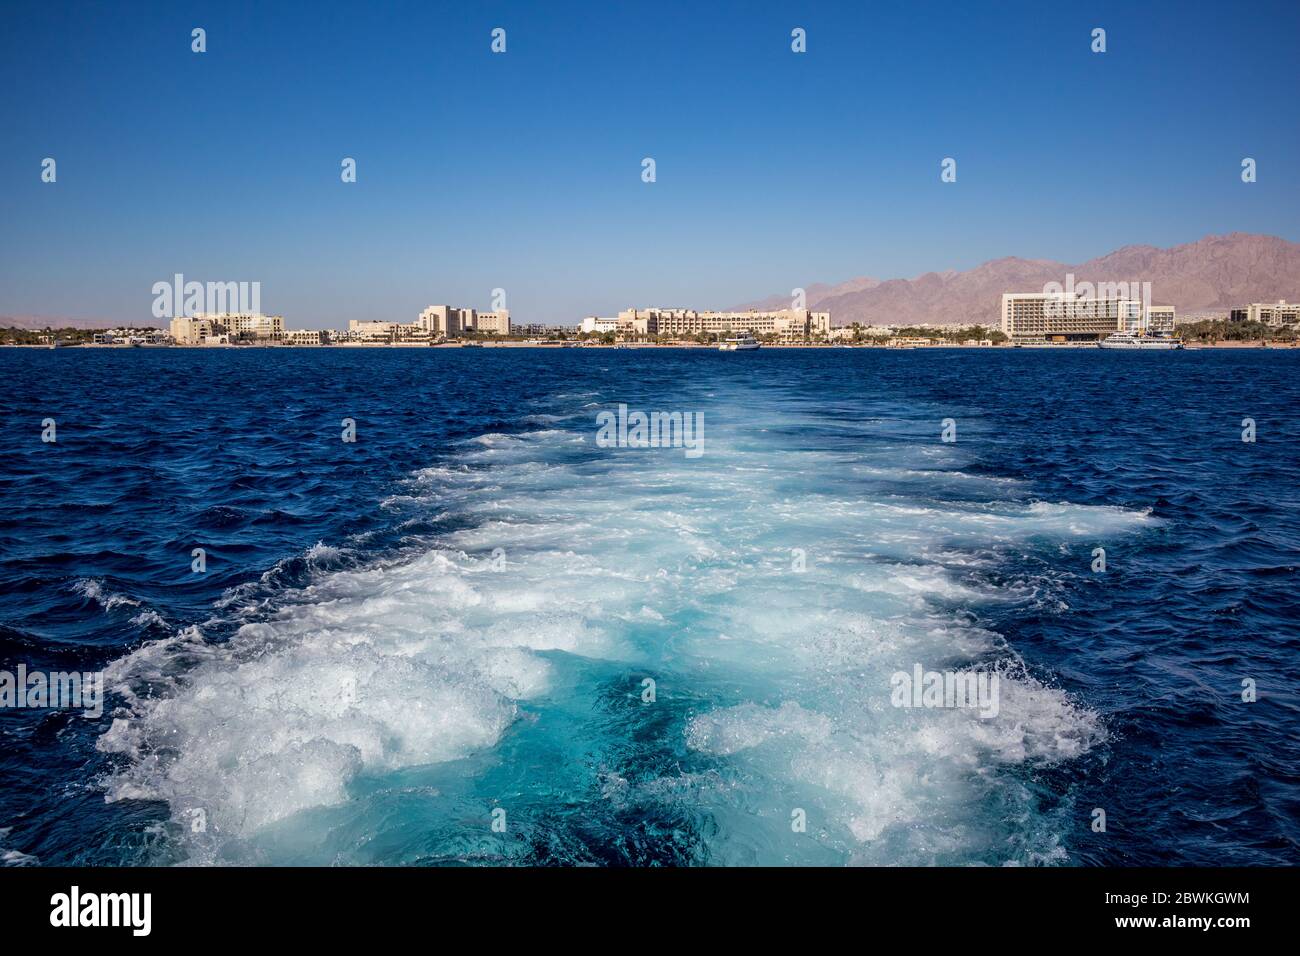 Gulf of Aqaba as seen from tourist boats, Jordan. Some front line hotels and the crystal blue water of Red Sea, sunny winter afternoon, water foam from the speeding vessel Stock Photo